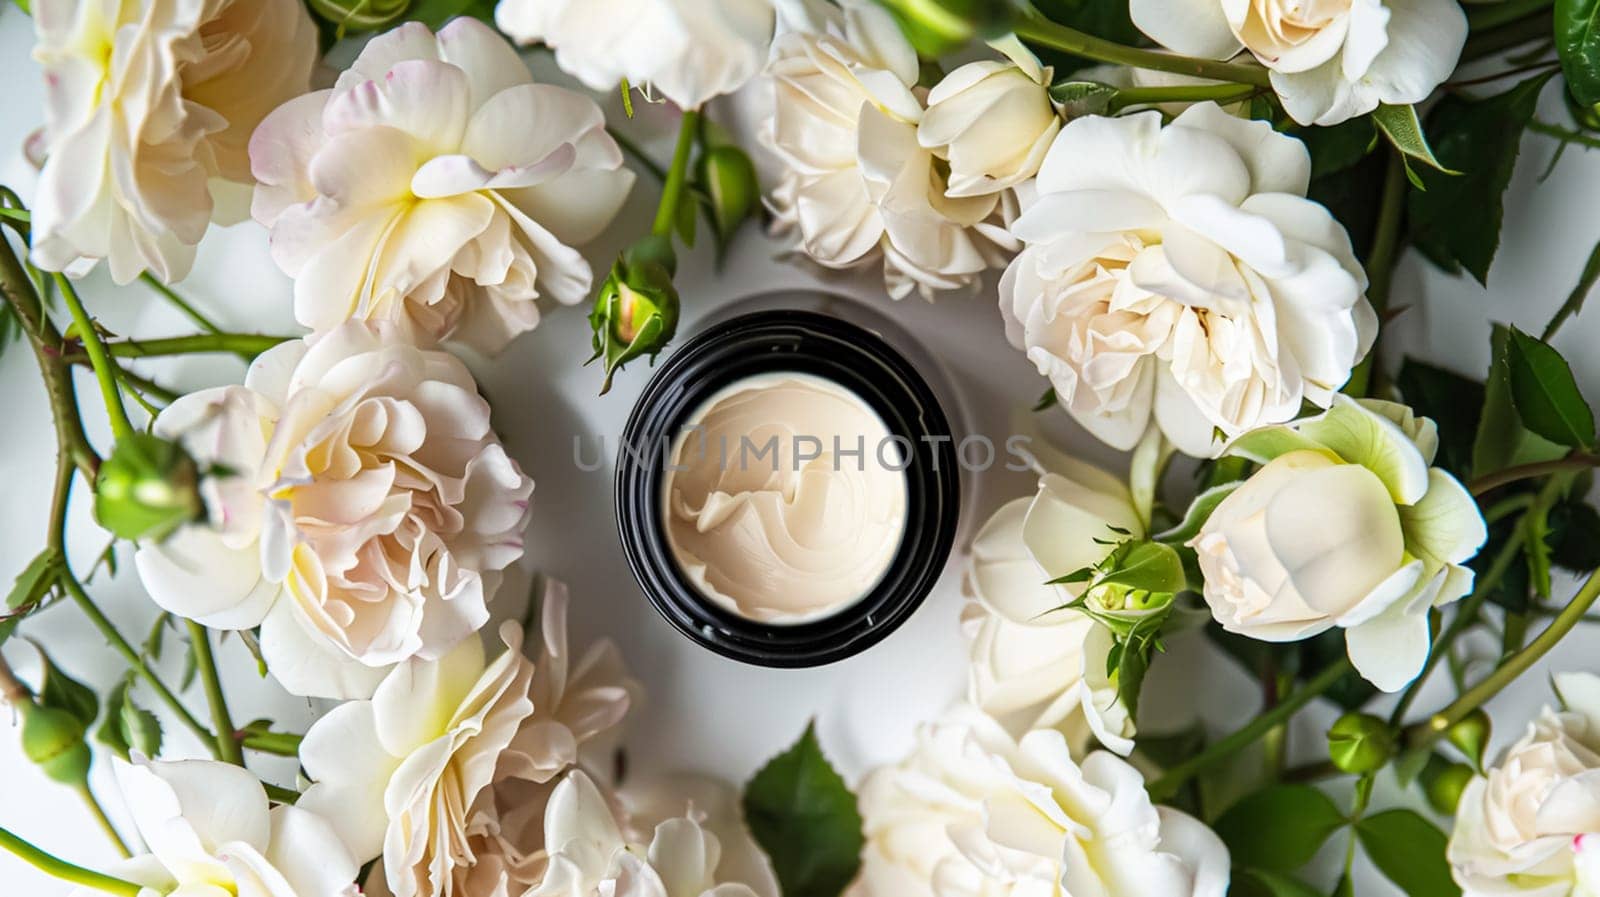 Face cream moisturizer jar on floral background. Cosmetic branding, toiletries and skincare concept by Olayola